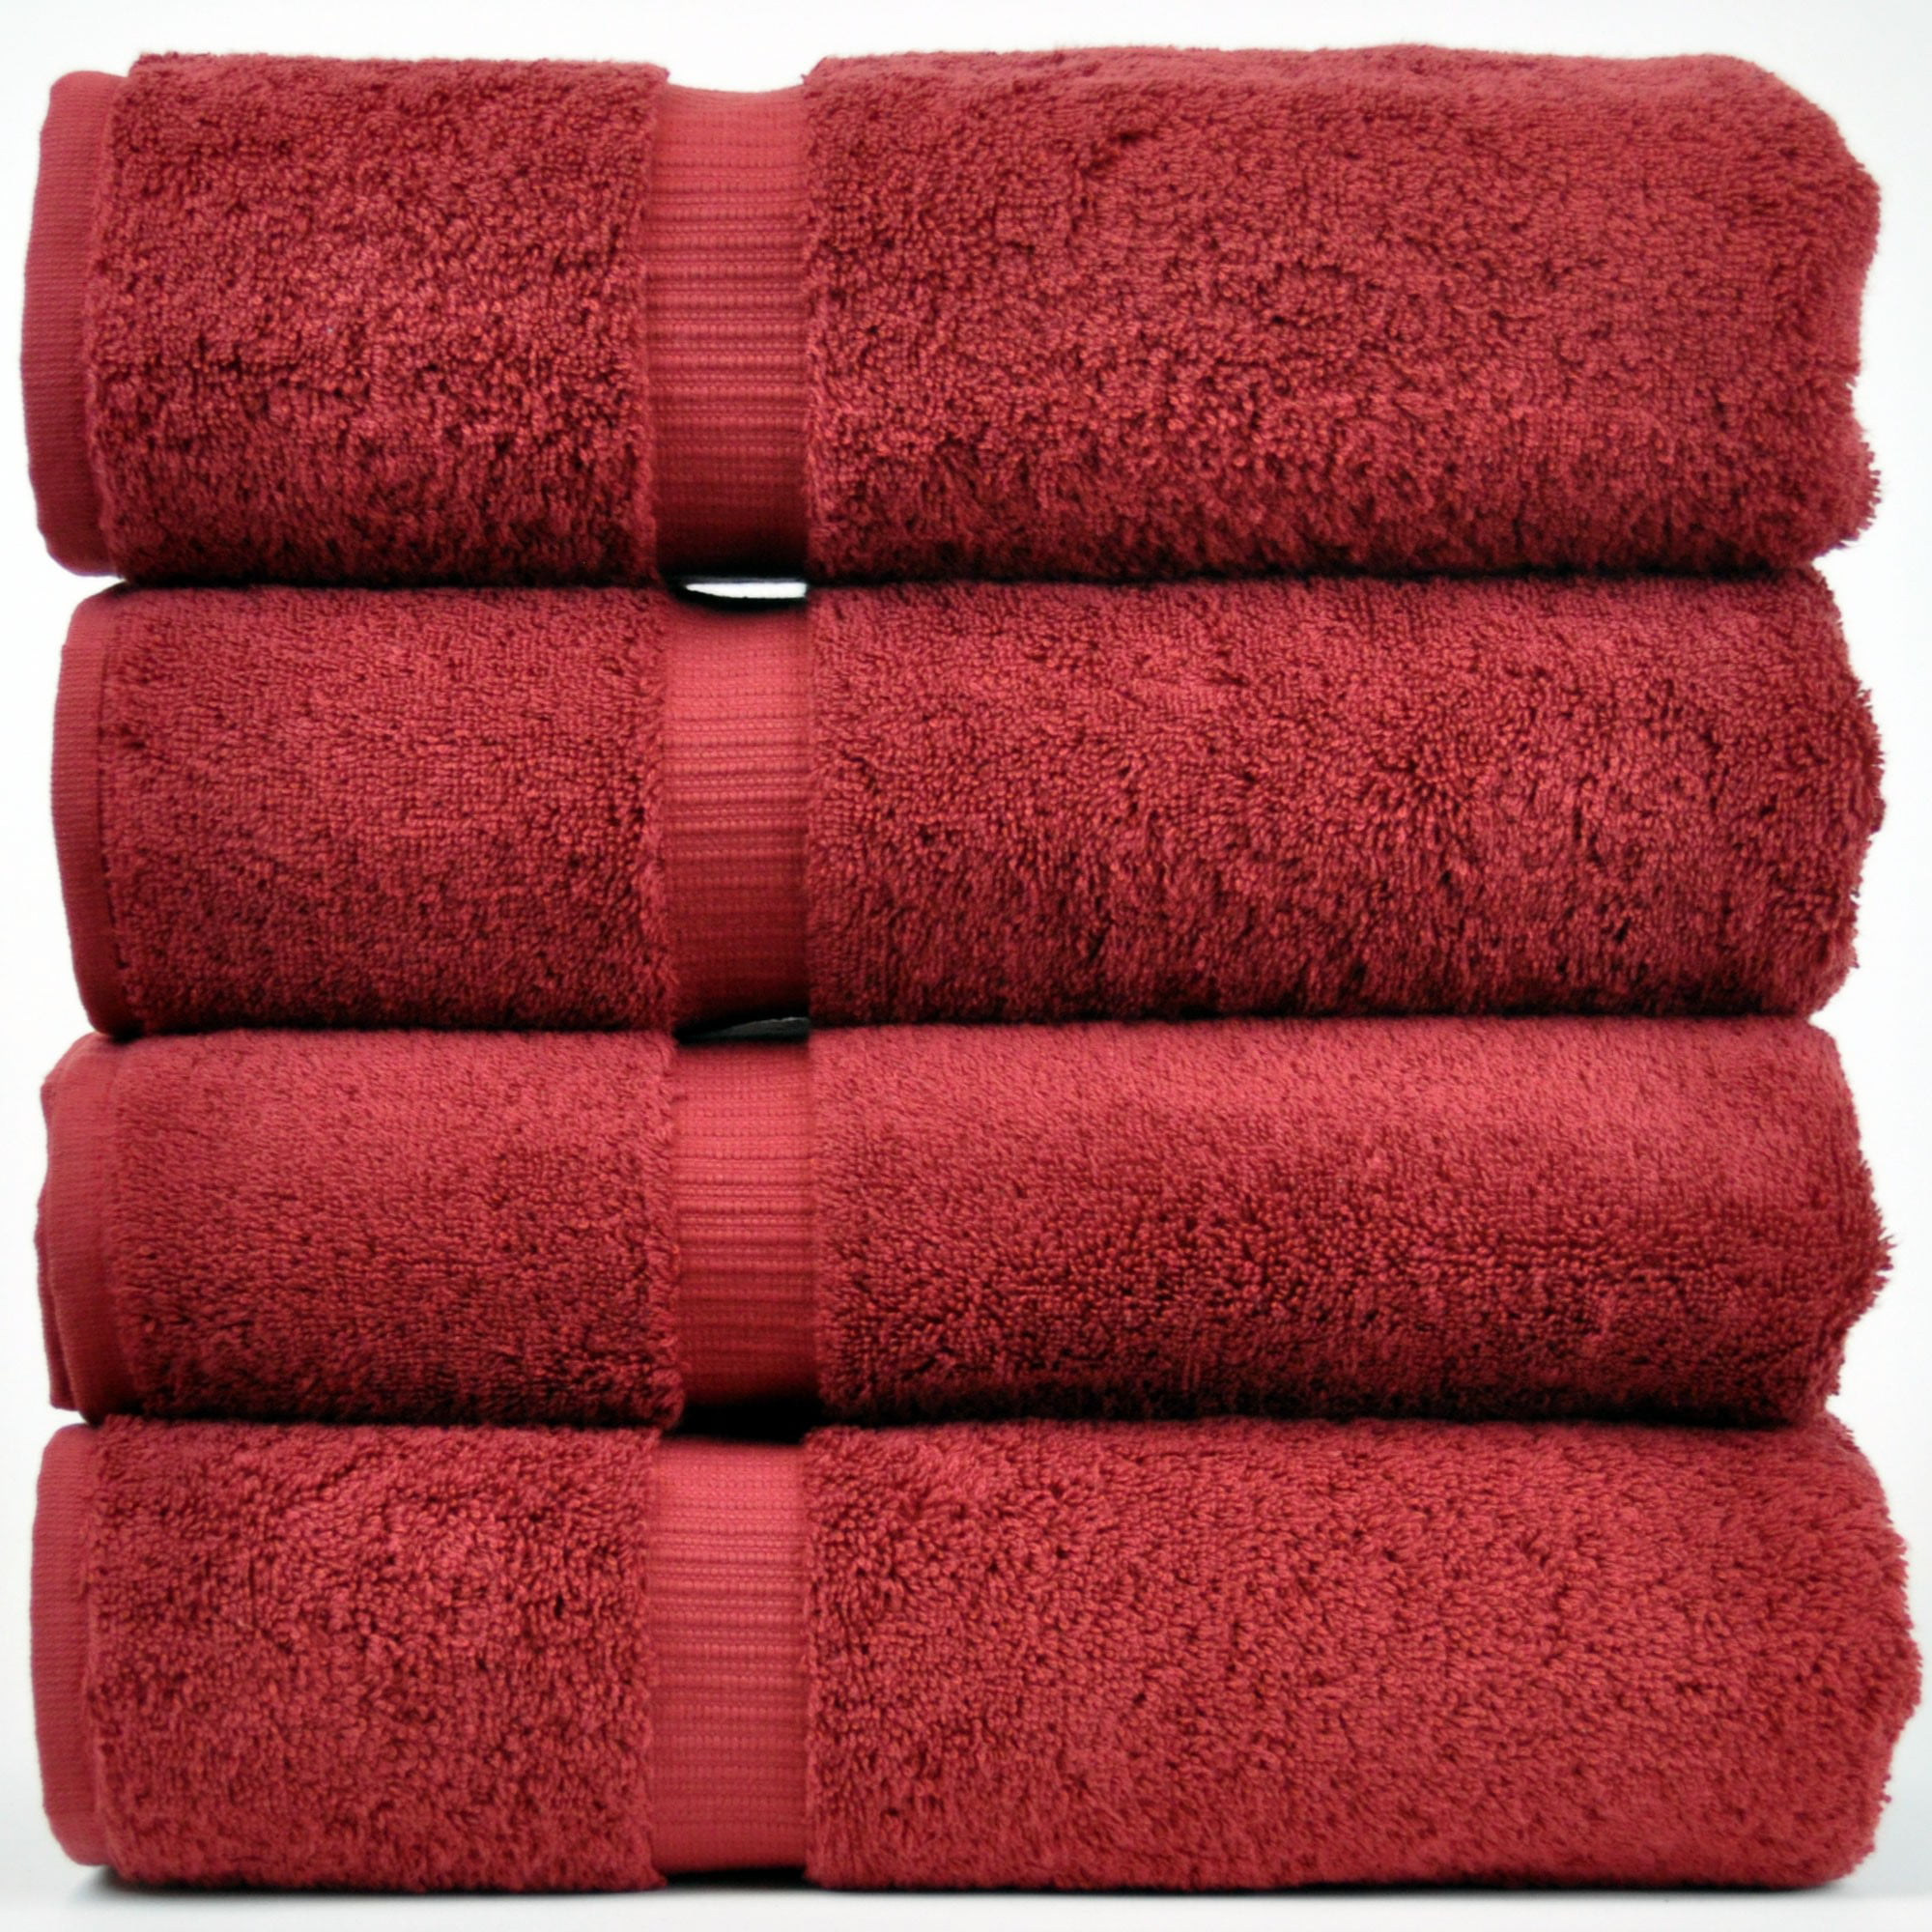 Extra Large 13"x13" Premium Turkish Towels Thick Details about   Maura 6 Piece Washclothes Set 